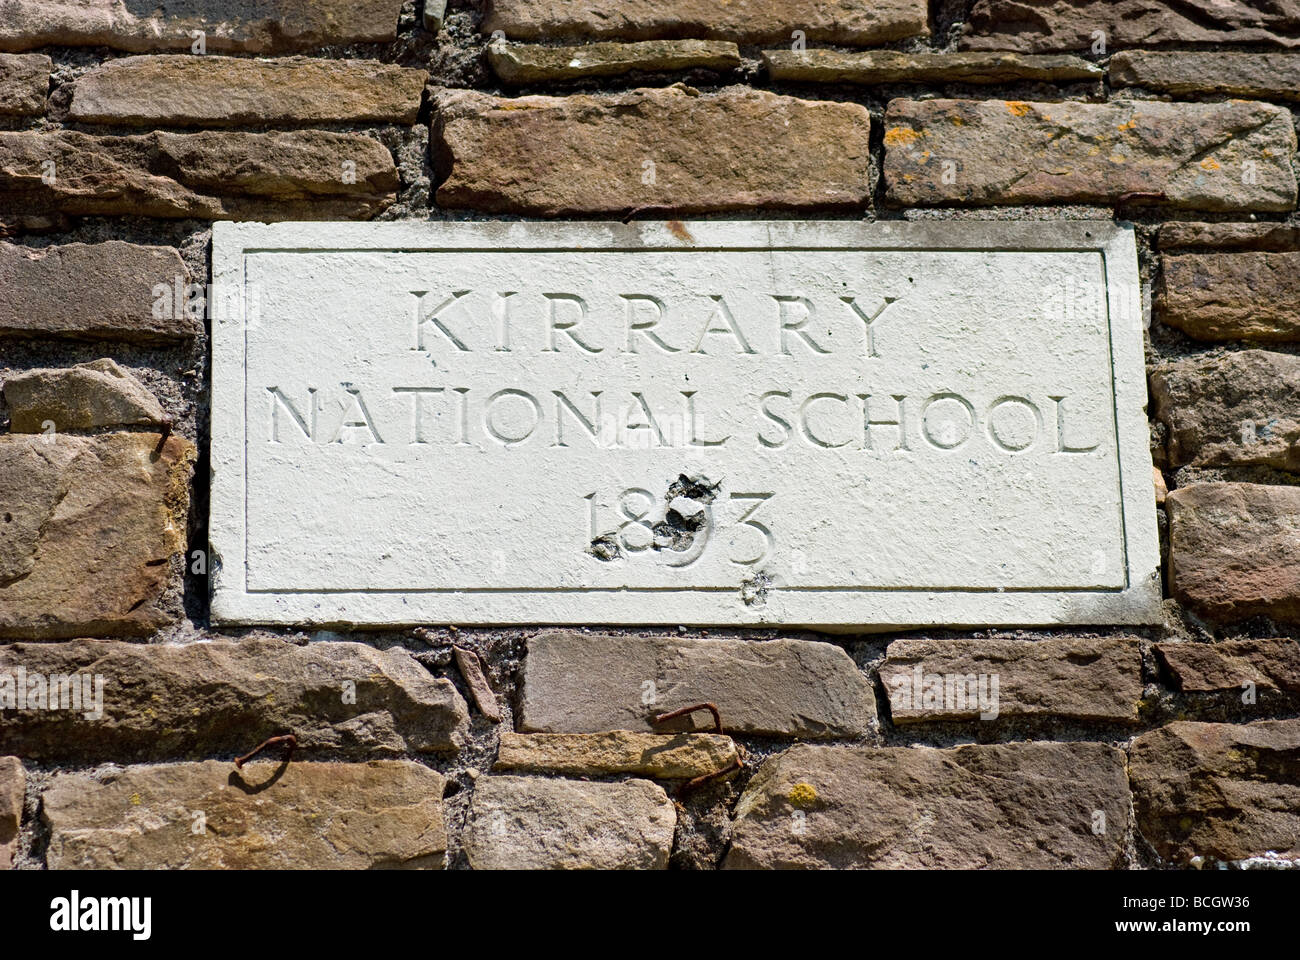 Kirrary National School plaque on the wall of the school used in the movie Ryan's Daughter (1970) filmed in Dingle, Ireland. Stock Photo